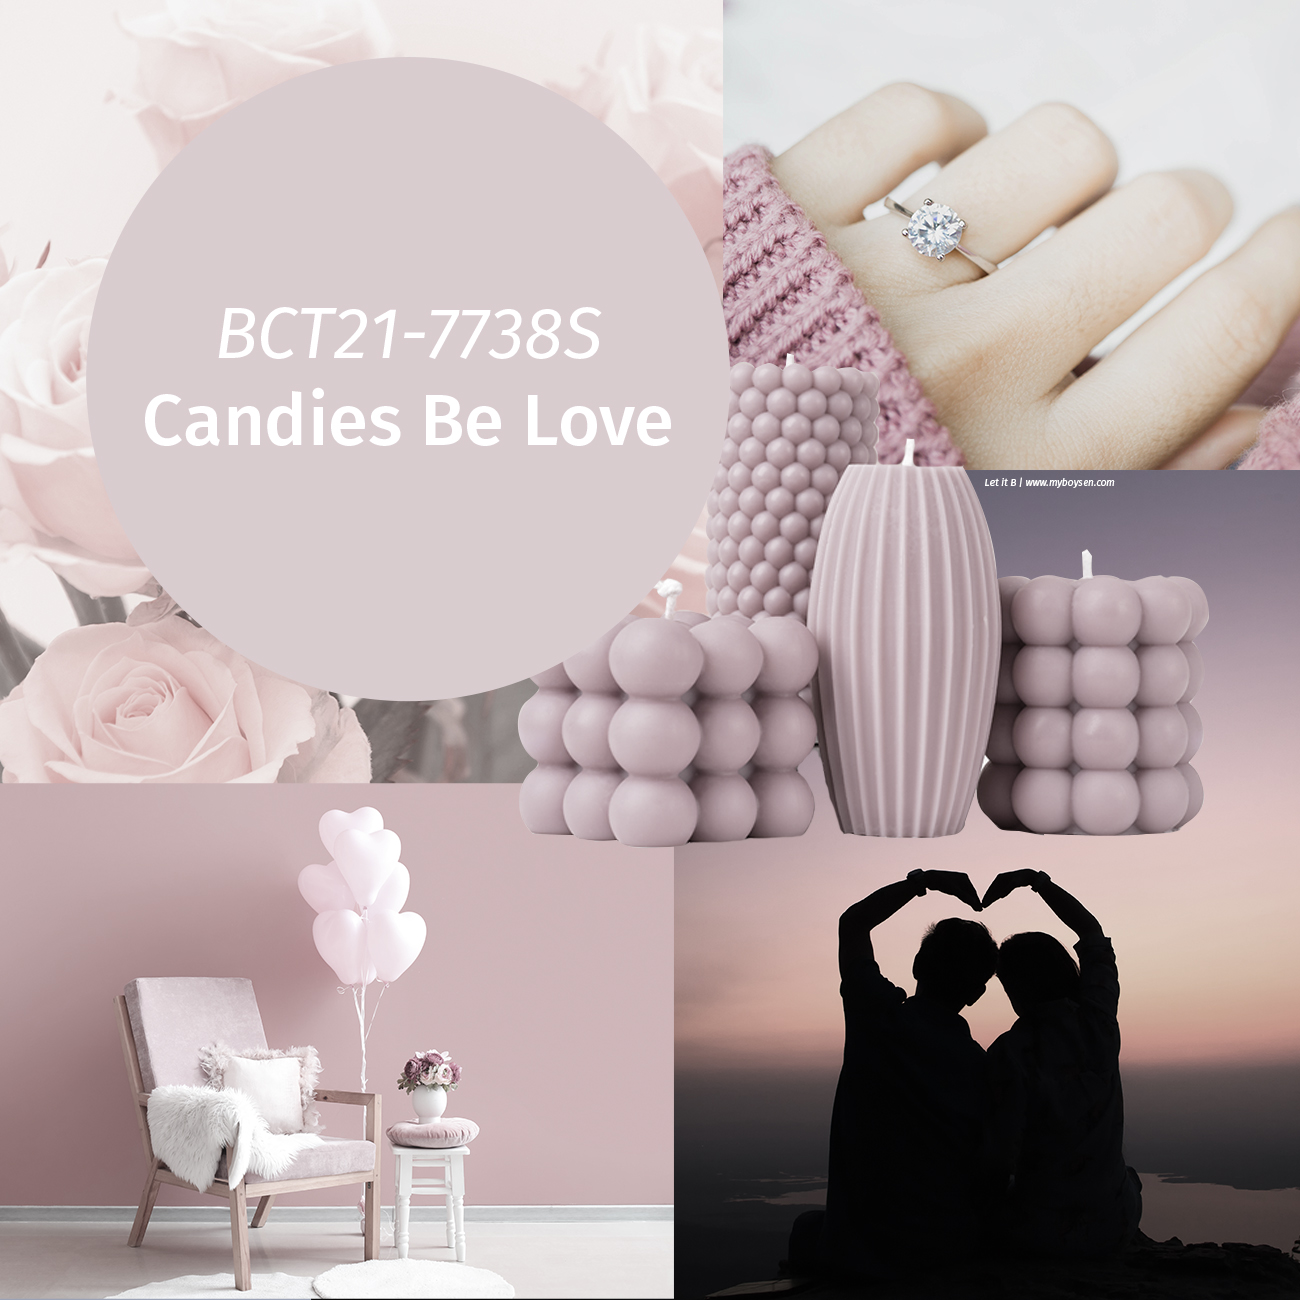 Midyear Moodboards with the BLOOM Color Palette | MyBoysen